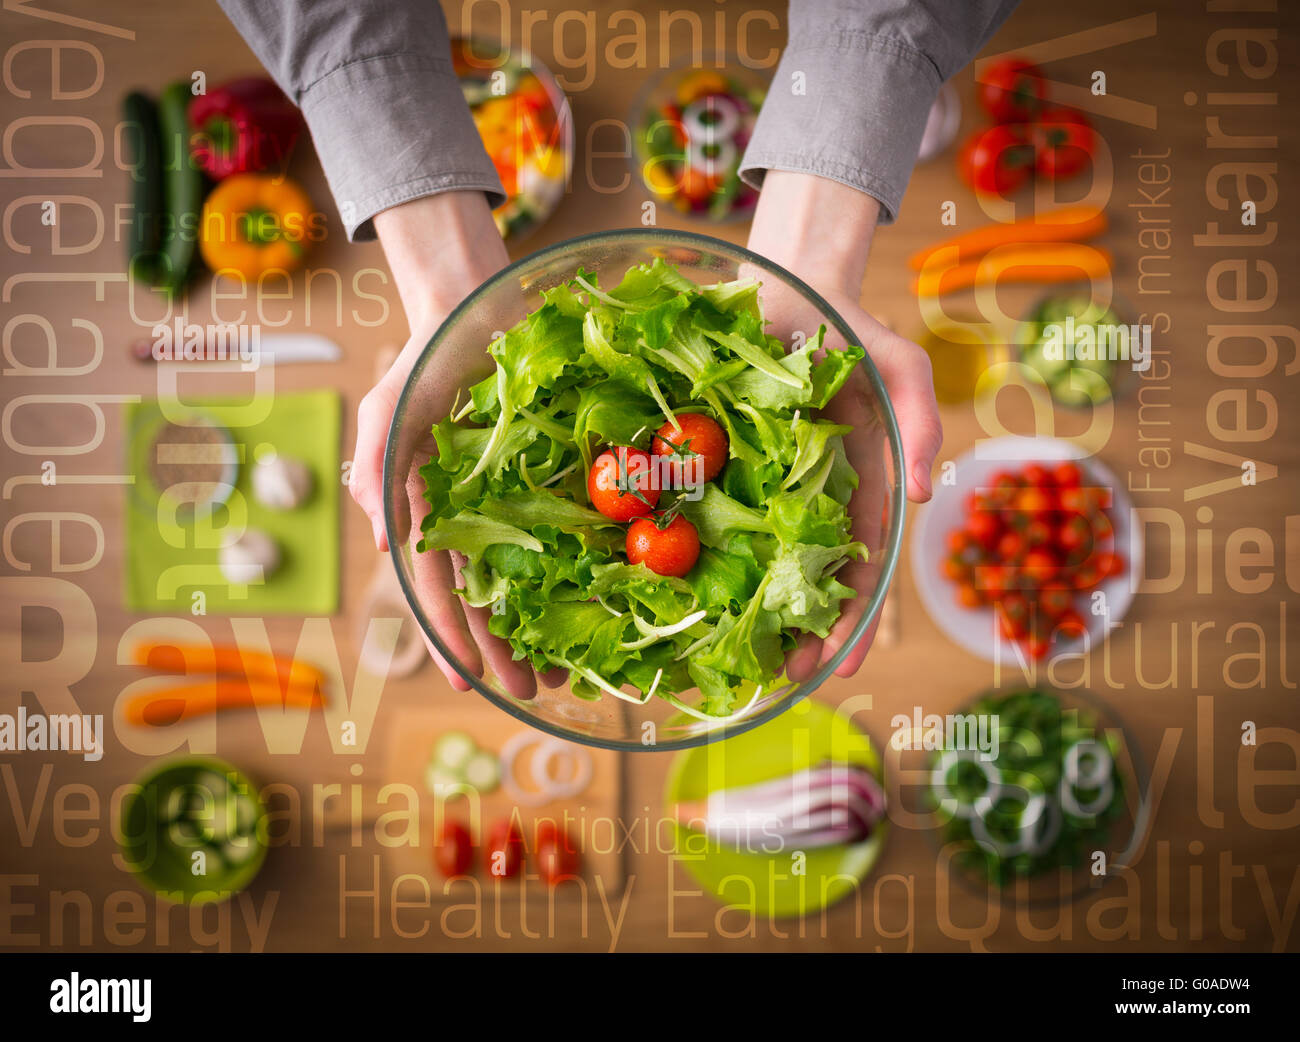 Hands holding an healthy fresh vegetarian salad in a bowl, fresh raw vegetables on background and healthy eating text concepts Stock Photo